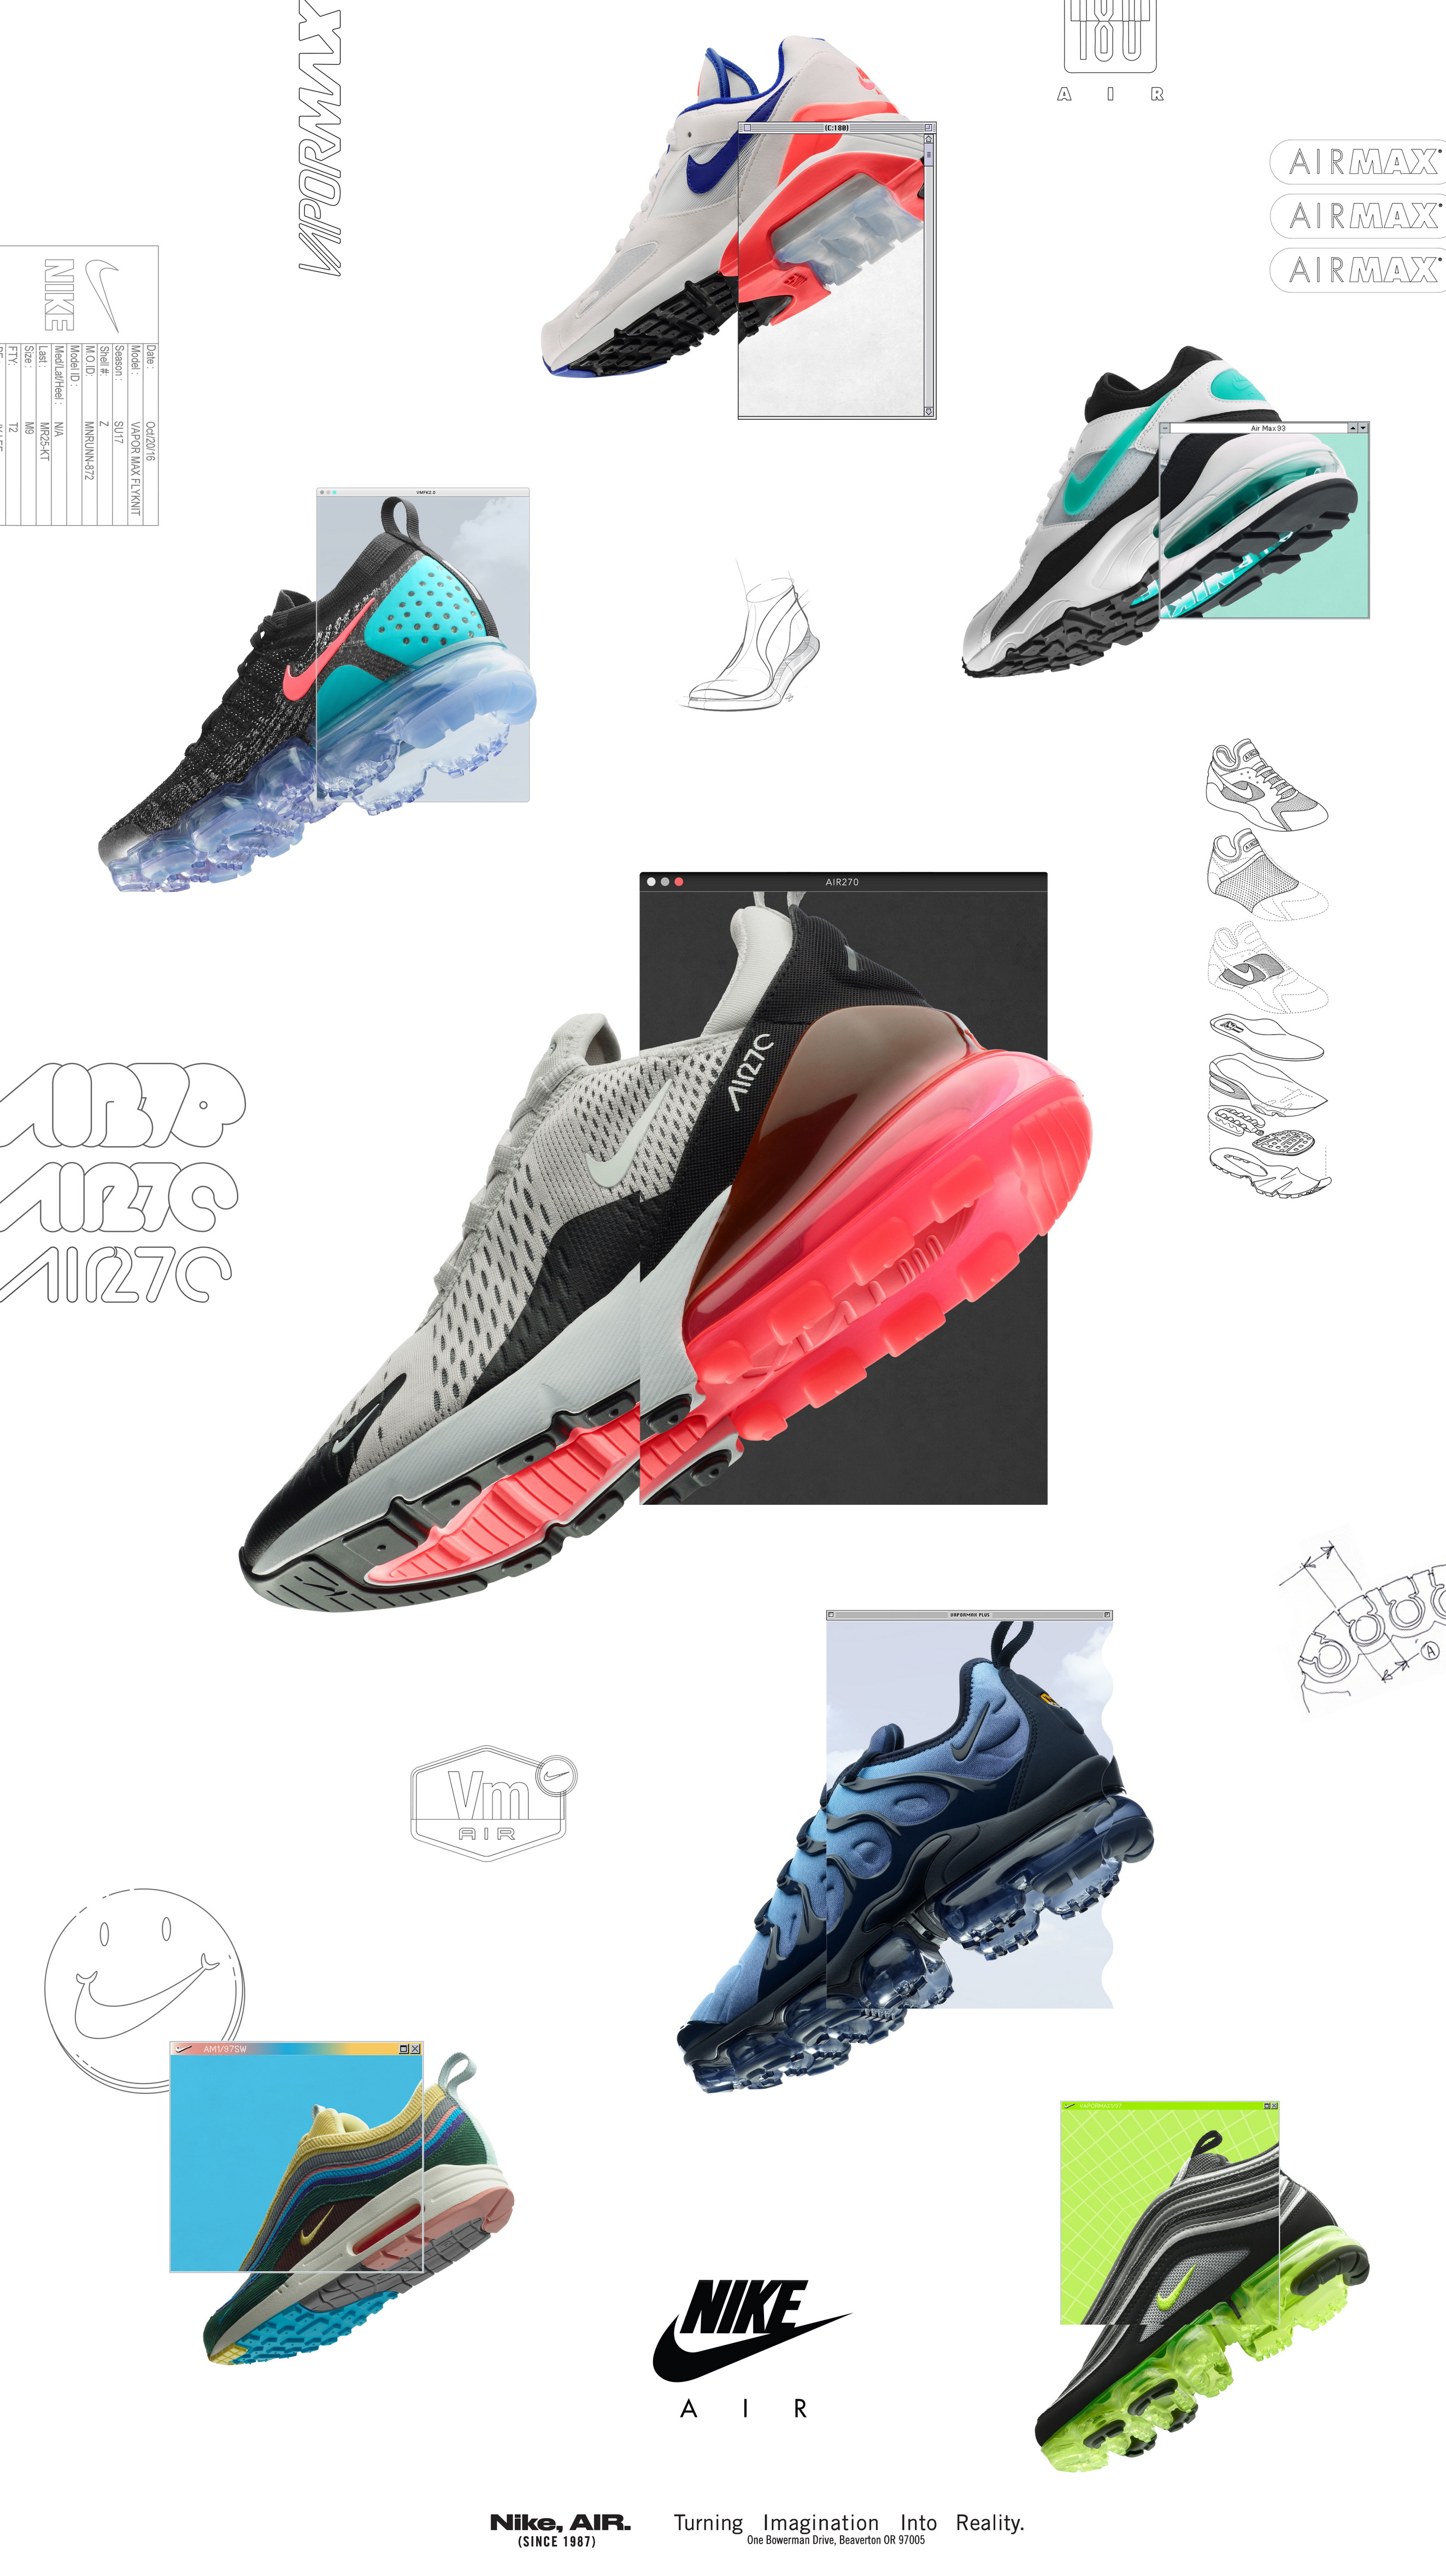 NIKE AIR MAX DAY 2018 RELEASES 1